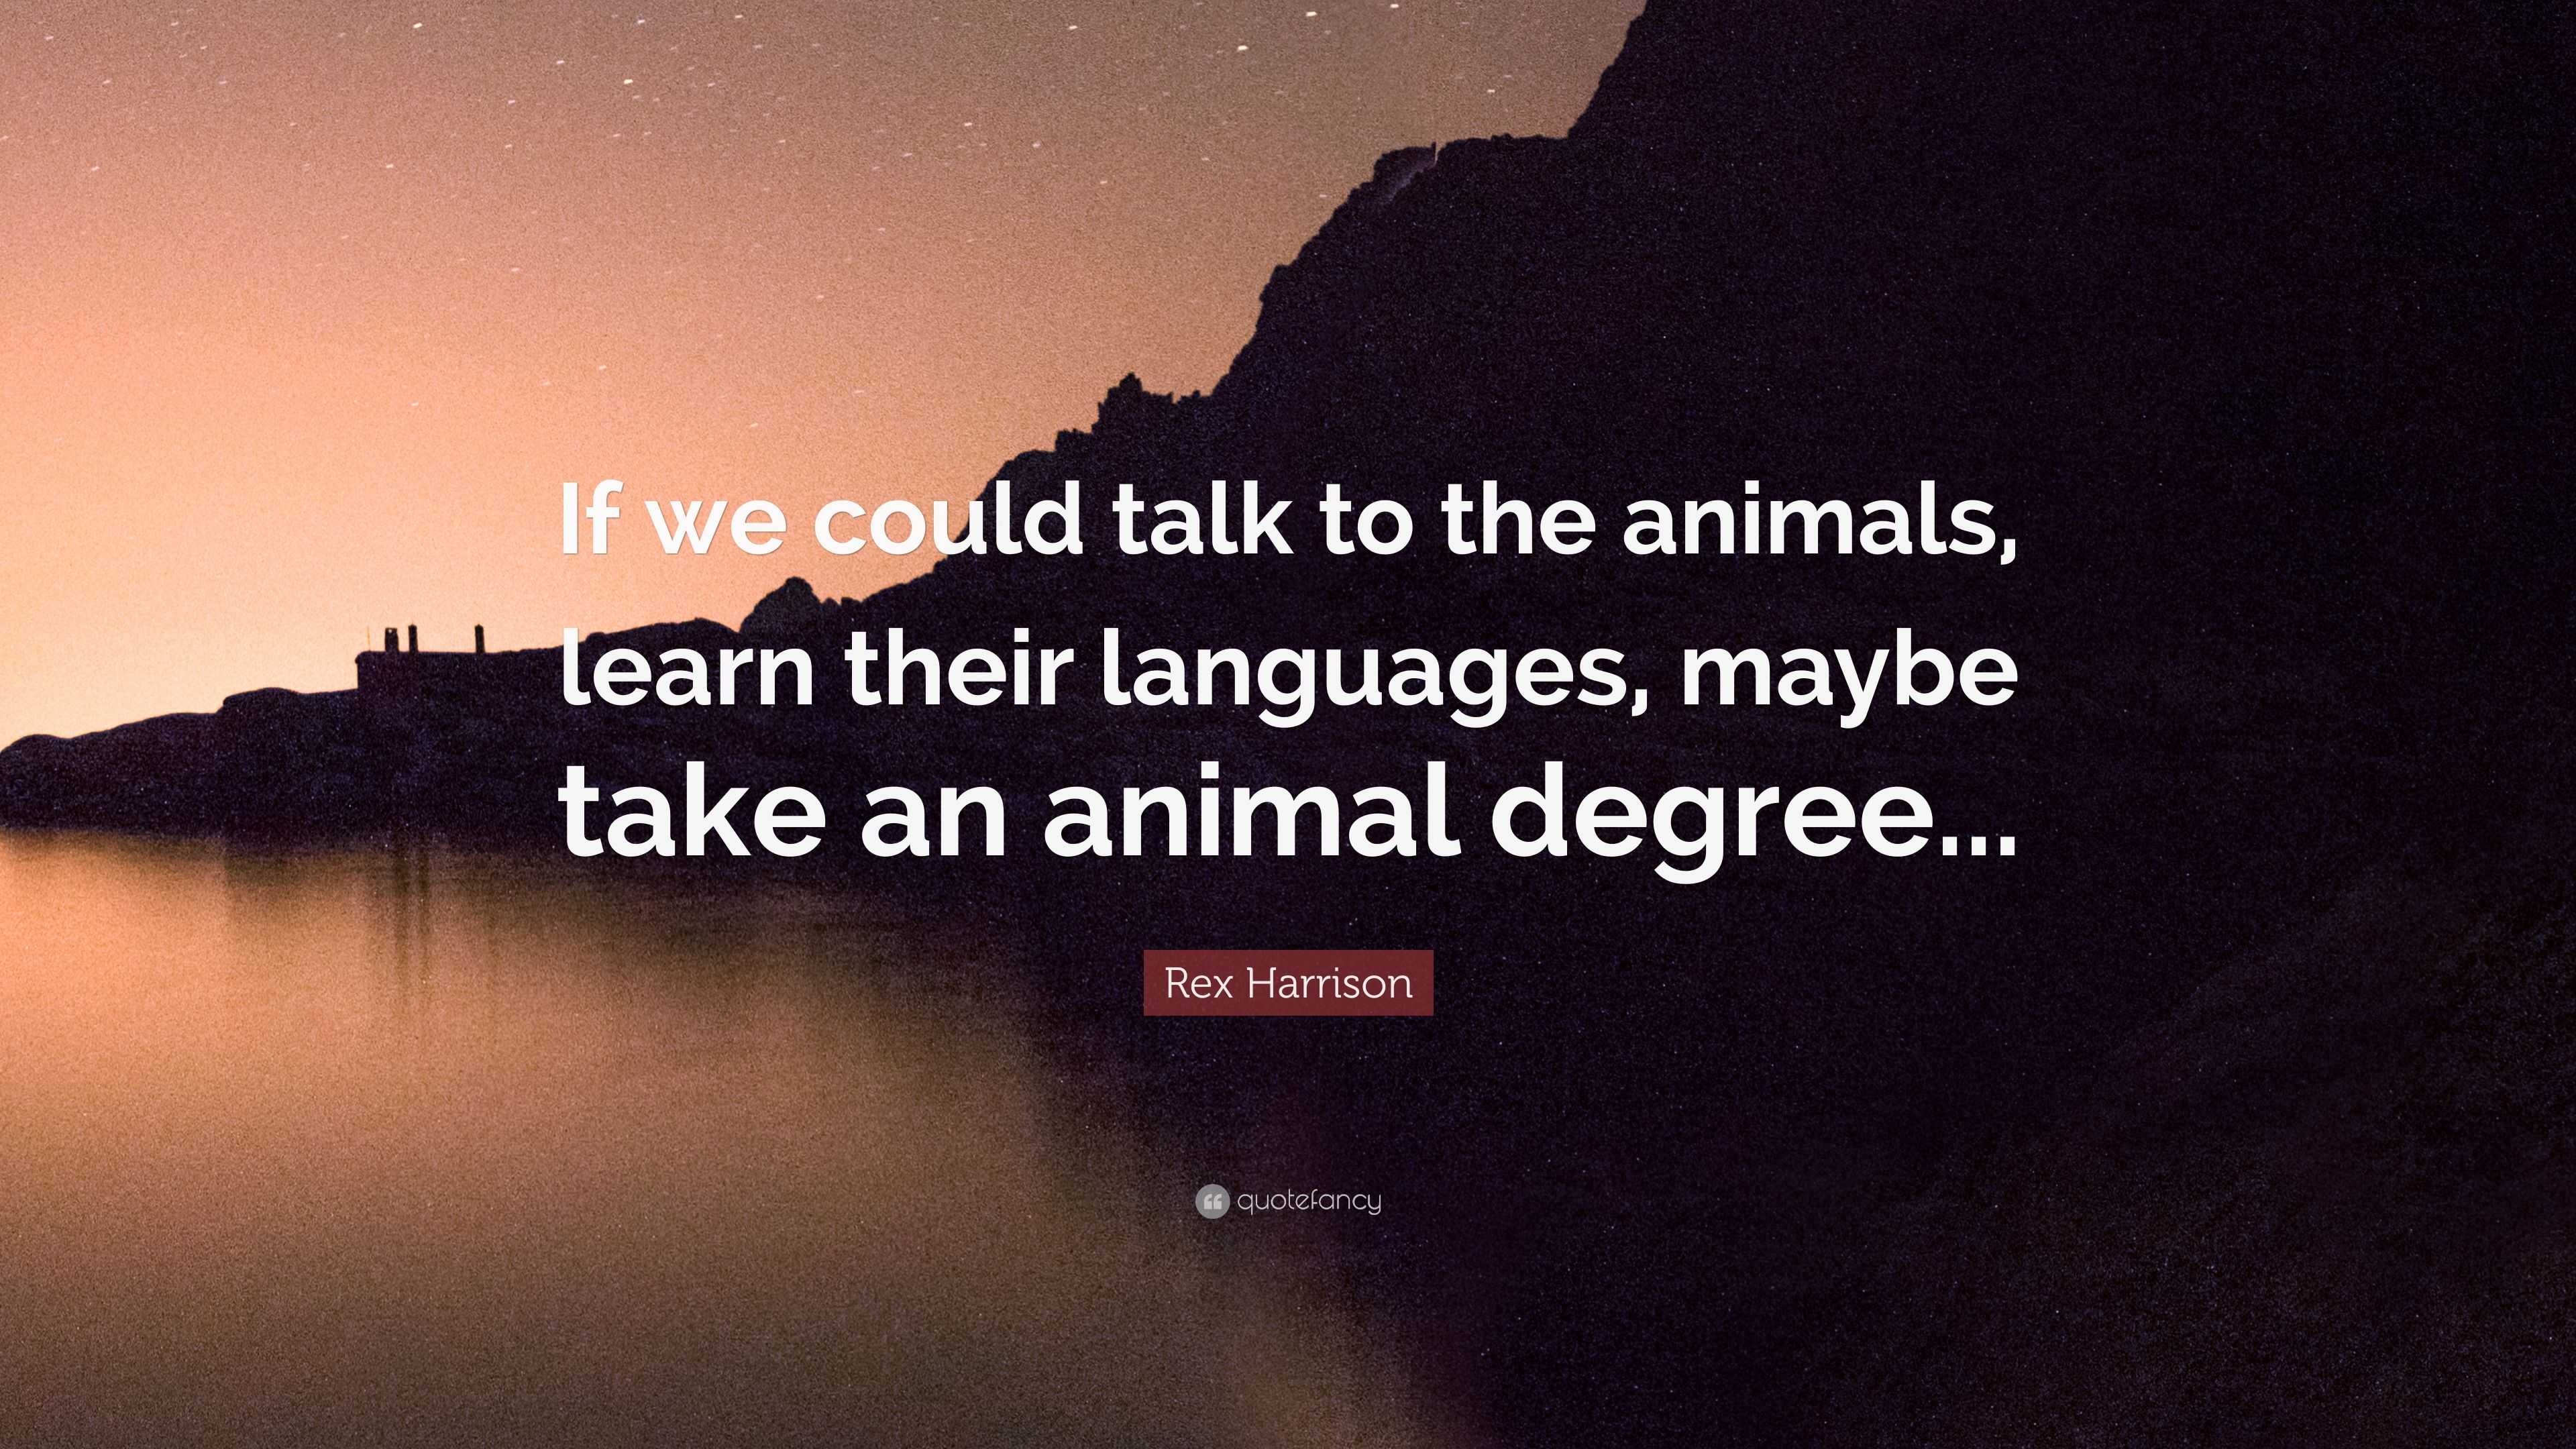 Rex Harrison Quote: “If we could talk to the animals, learn their  languages, maybe take an